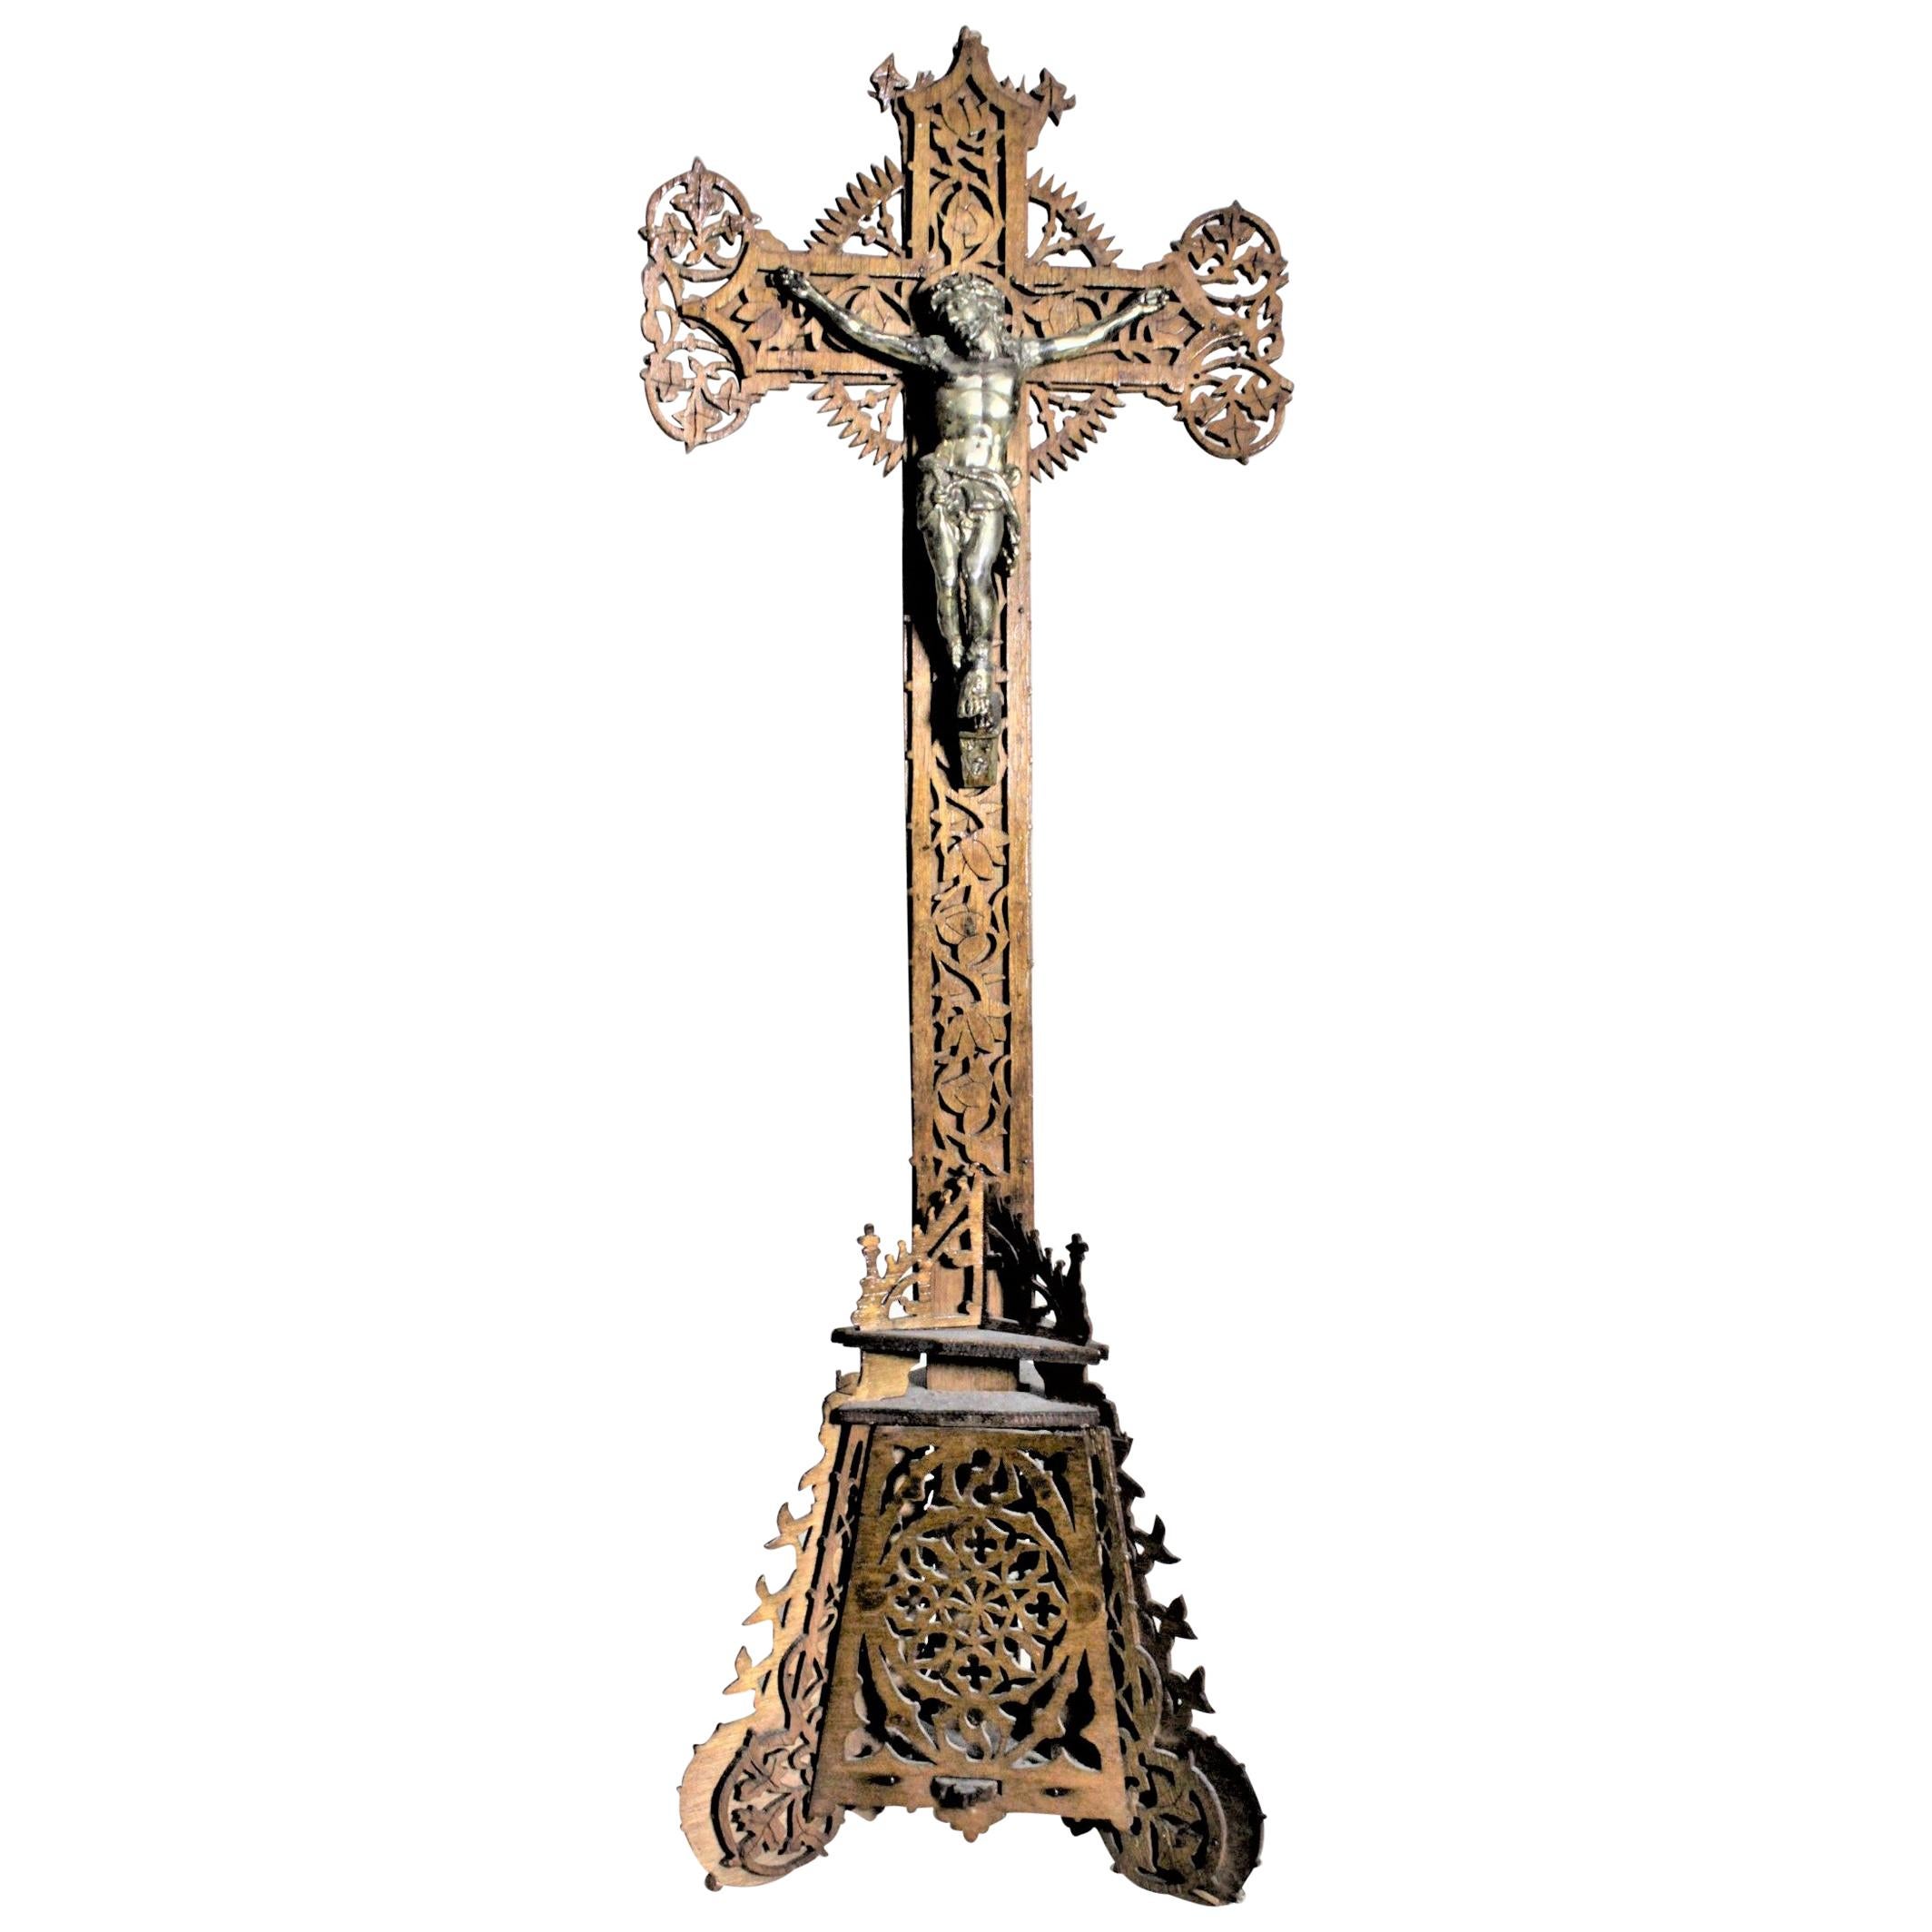 Antique Large Folk Art Handcrafted Wooden Fretwork Crucifix or Cross and Stand For Sale